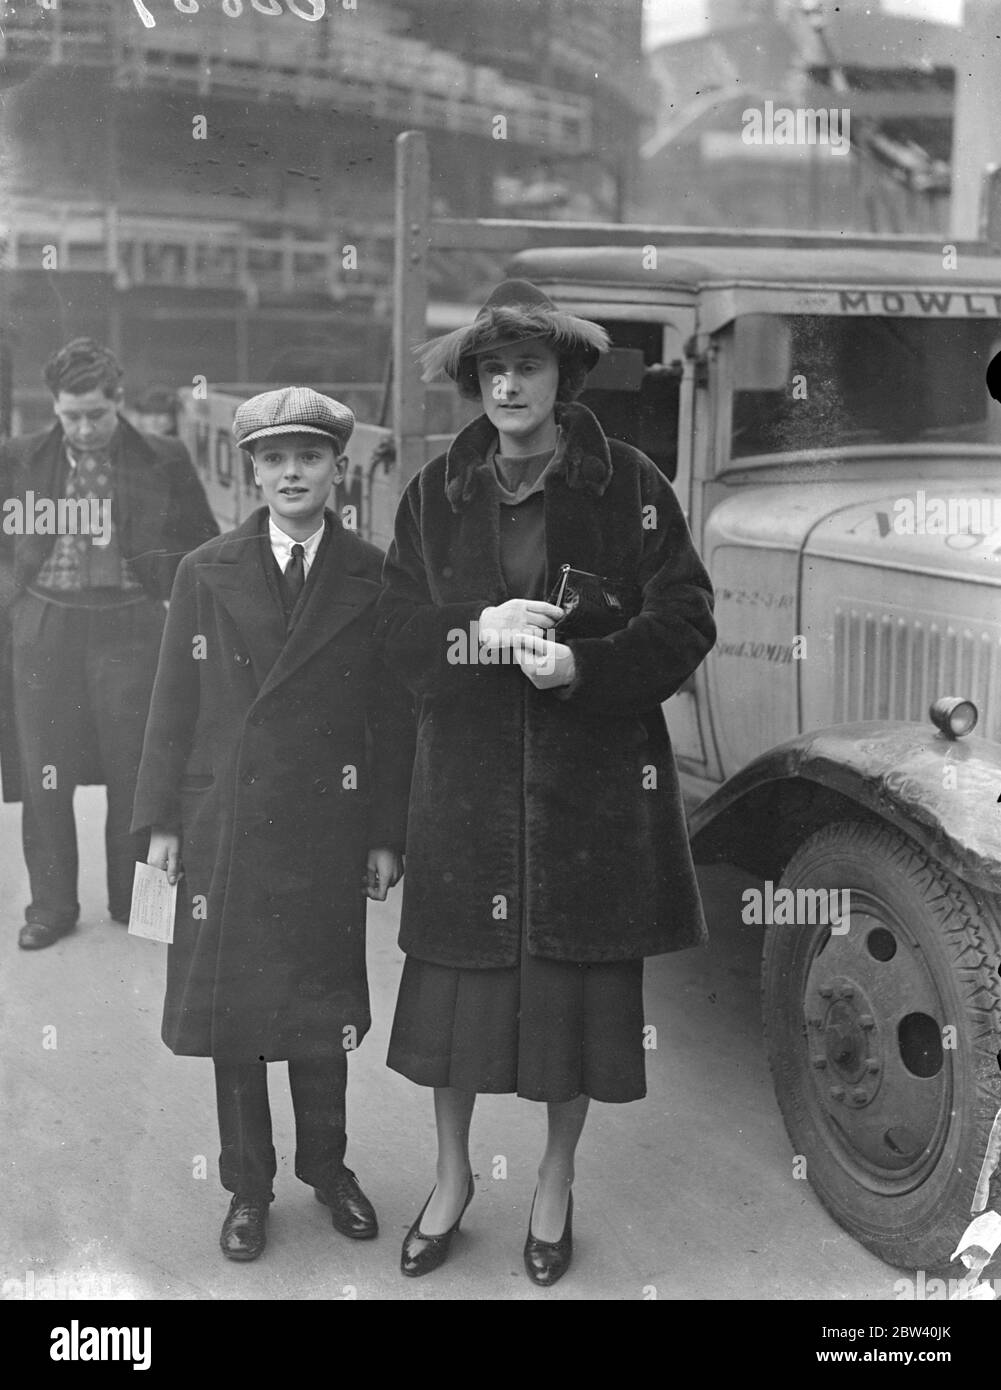 Duchess of Norfolk's stepmother at Abbey rehearsal. Peers and peeresses attend a rehearsal of the Coronation ceremony at Westminster Abbey. Photo shows: Lady Belper with her son, Hon. Peter Strutt, at the Abbey stop lady Belper is stepmother of the Duchess of Norfolk 26 April 1937 Stock Photo